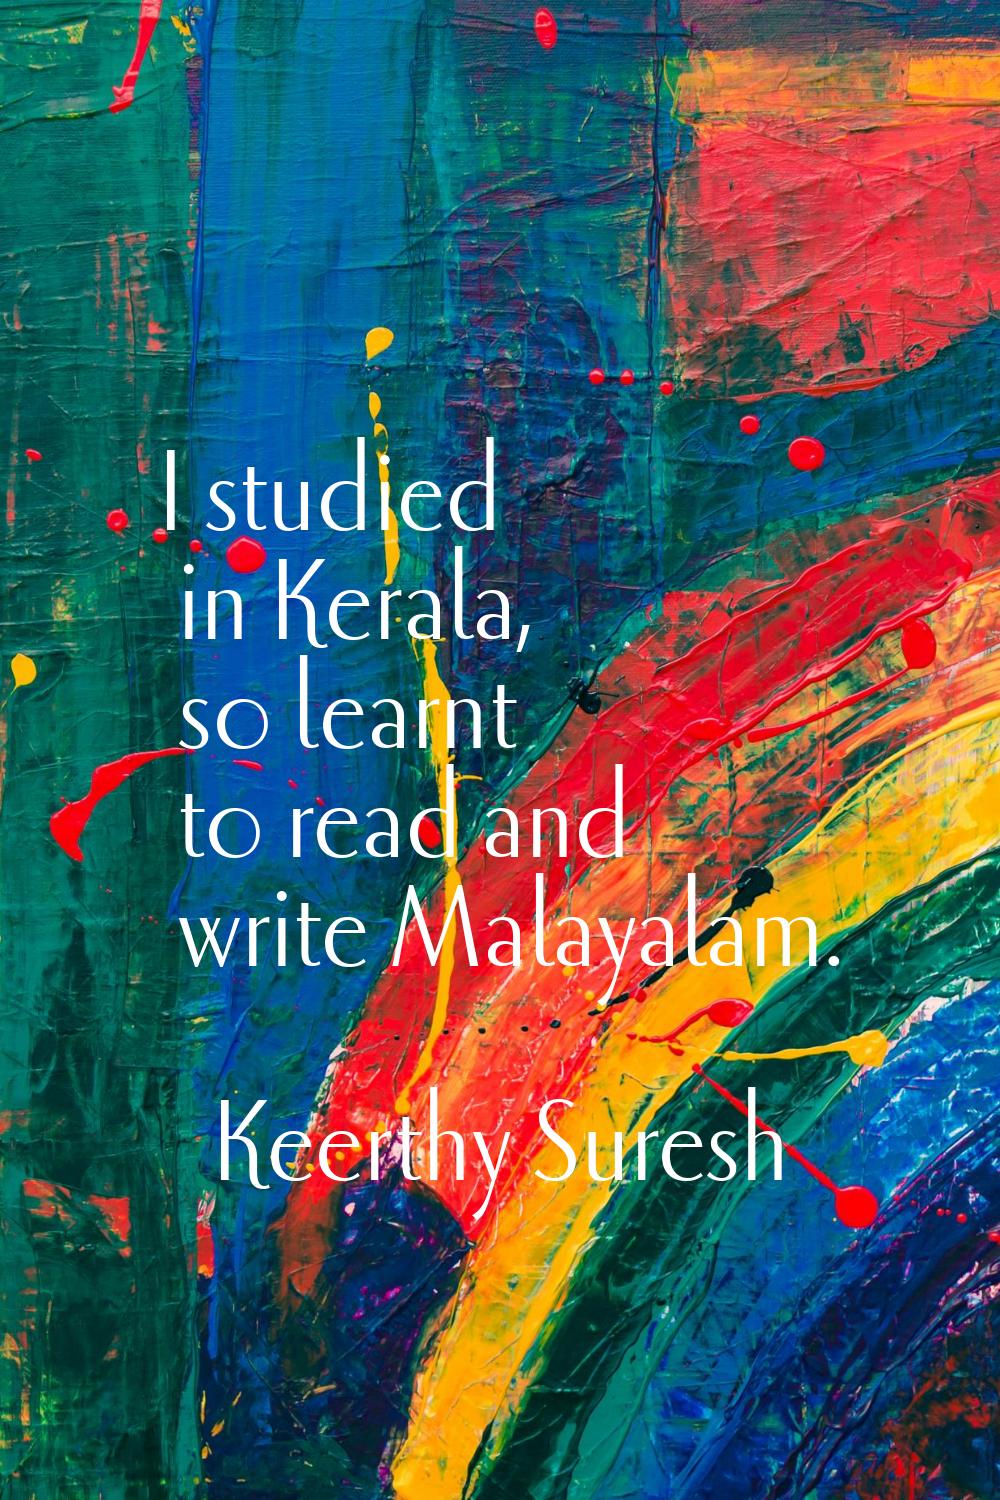 I studied in Kerala, so learnt to read and write Malayalam.